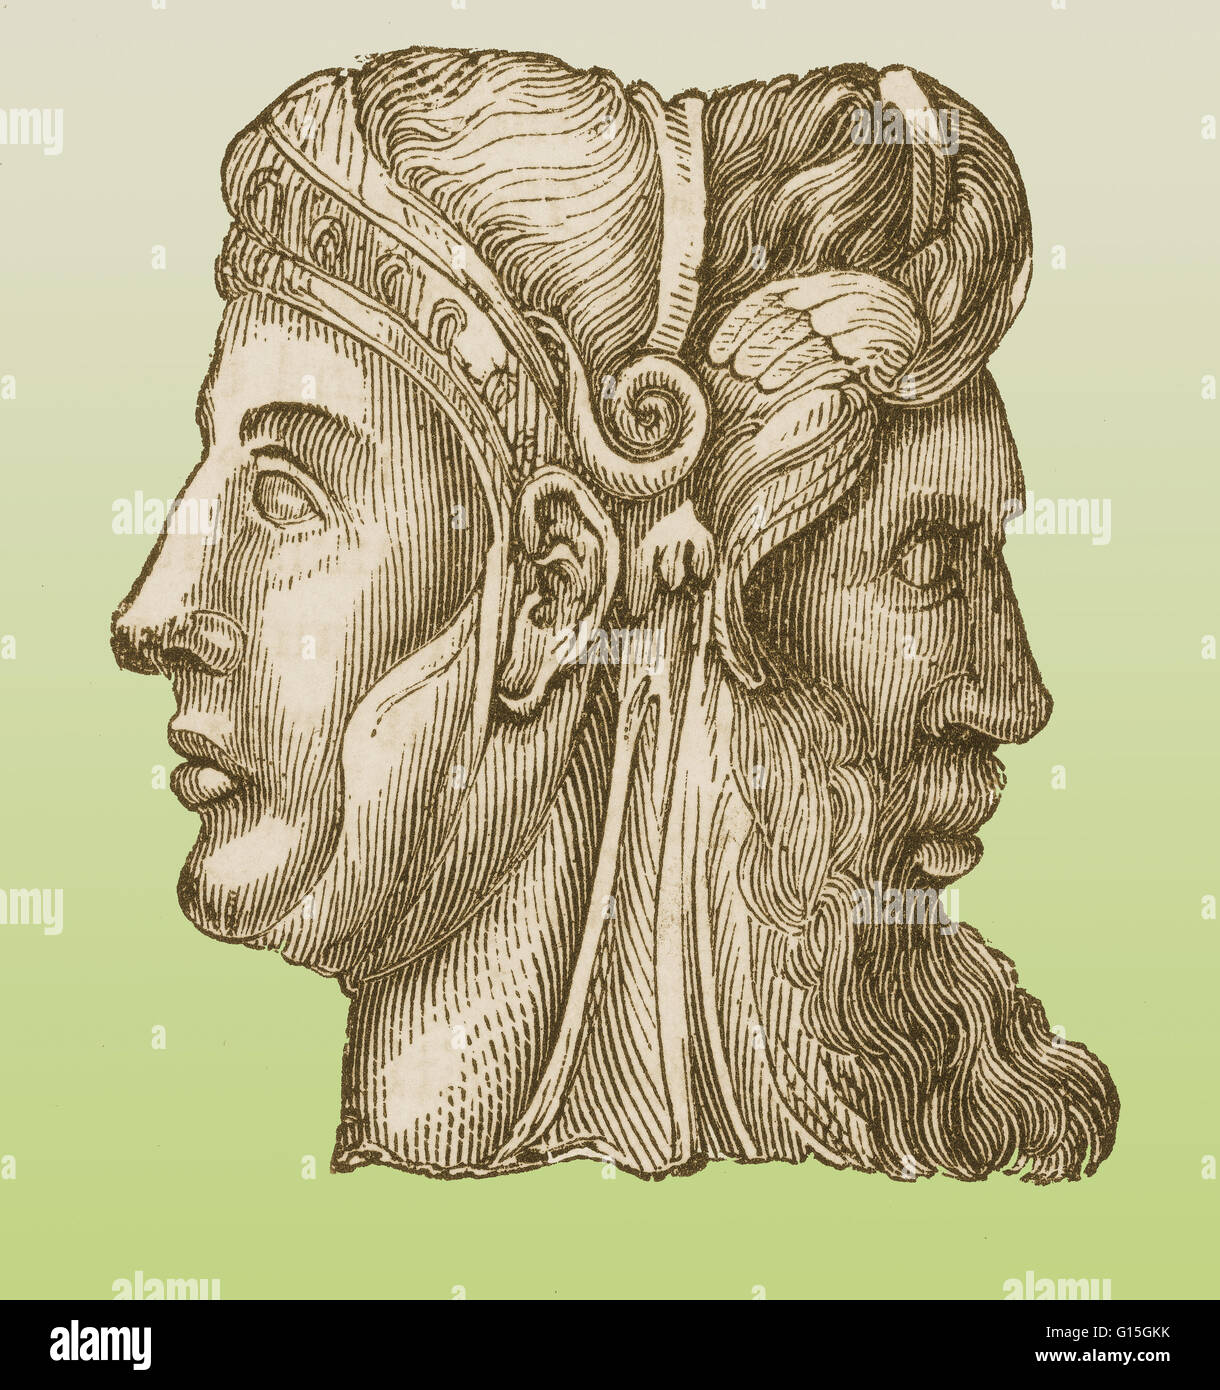 Janus, the ancient Roman god of beginnings and transitions (gates, doors, doorways, endings and time). He is usually shown as having two heads facing in opposite directions. Stock Photo